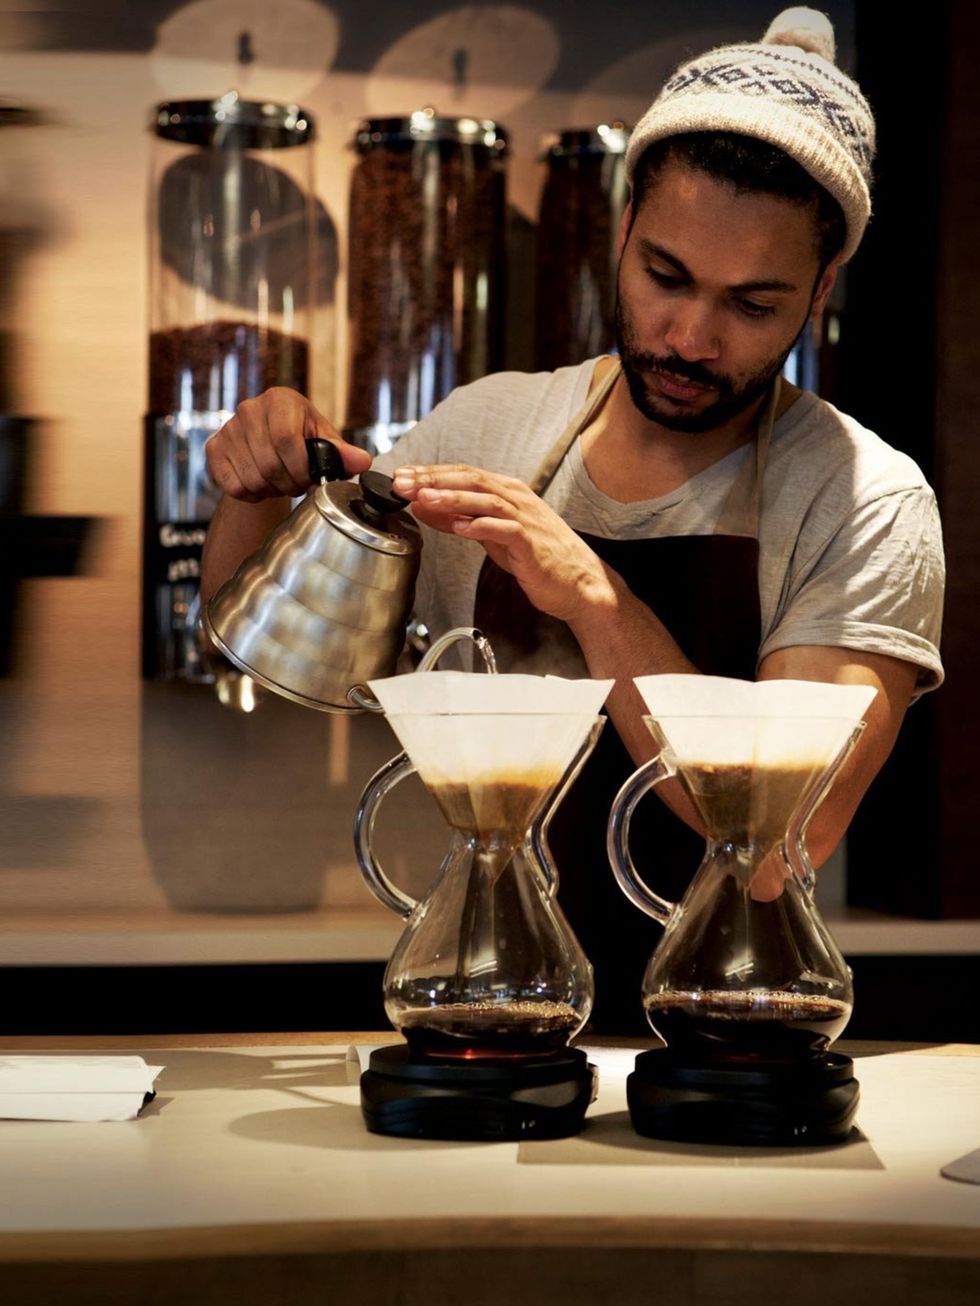 <p><strong>Drink now: London Coffee Festival </strong></p><p>Whether youre after a rich Italian or a bold Cuban, the London Coffee Festival has got the brew for you. Hosted at the Truman Brewery on Brick Lane, the festival is divided into zones, each off